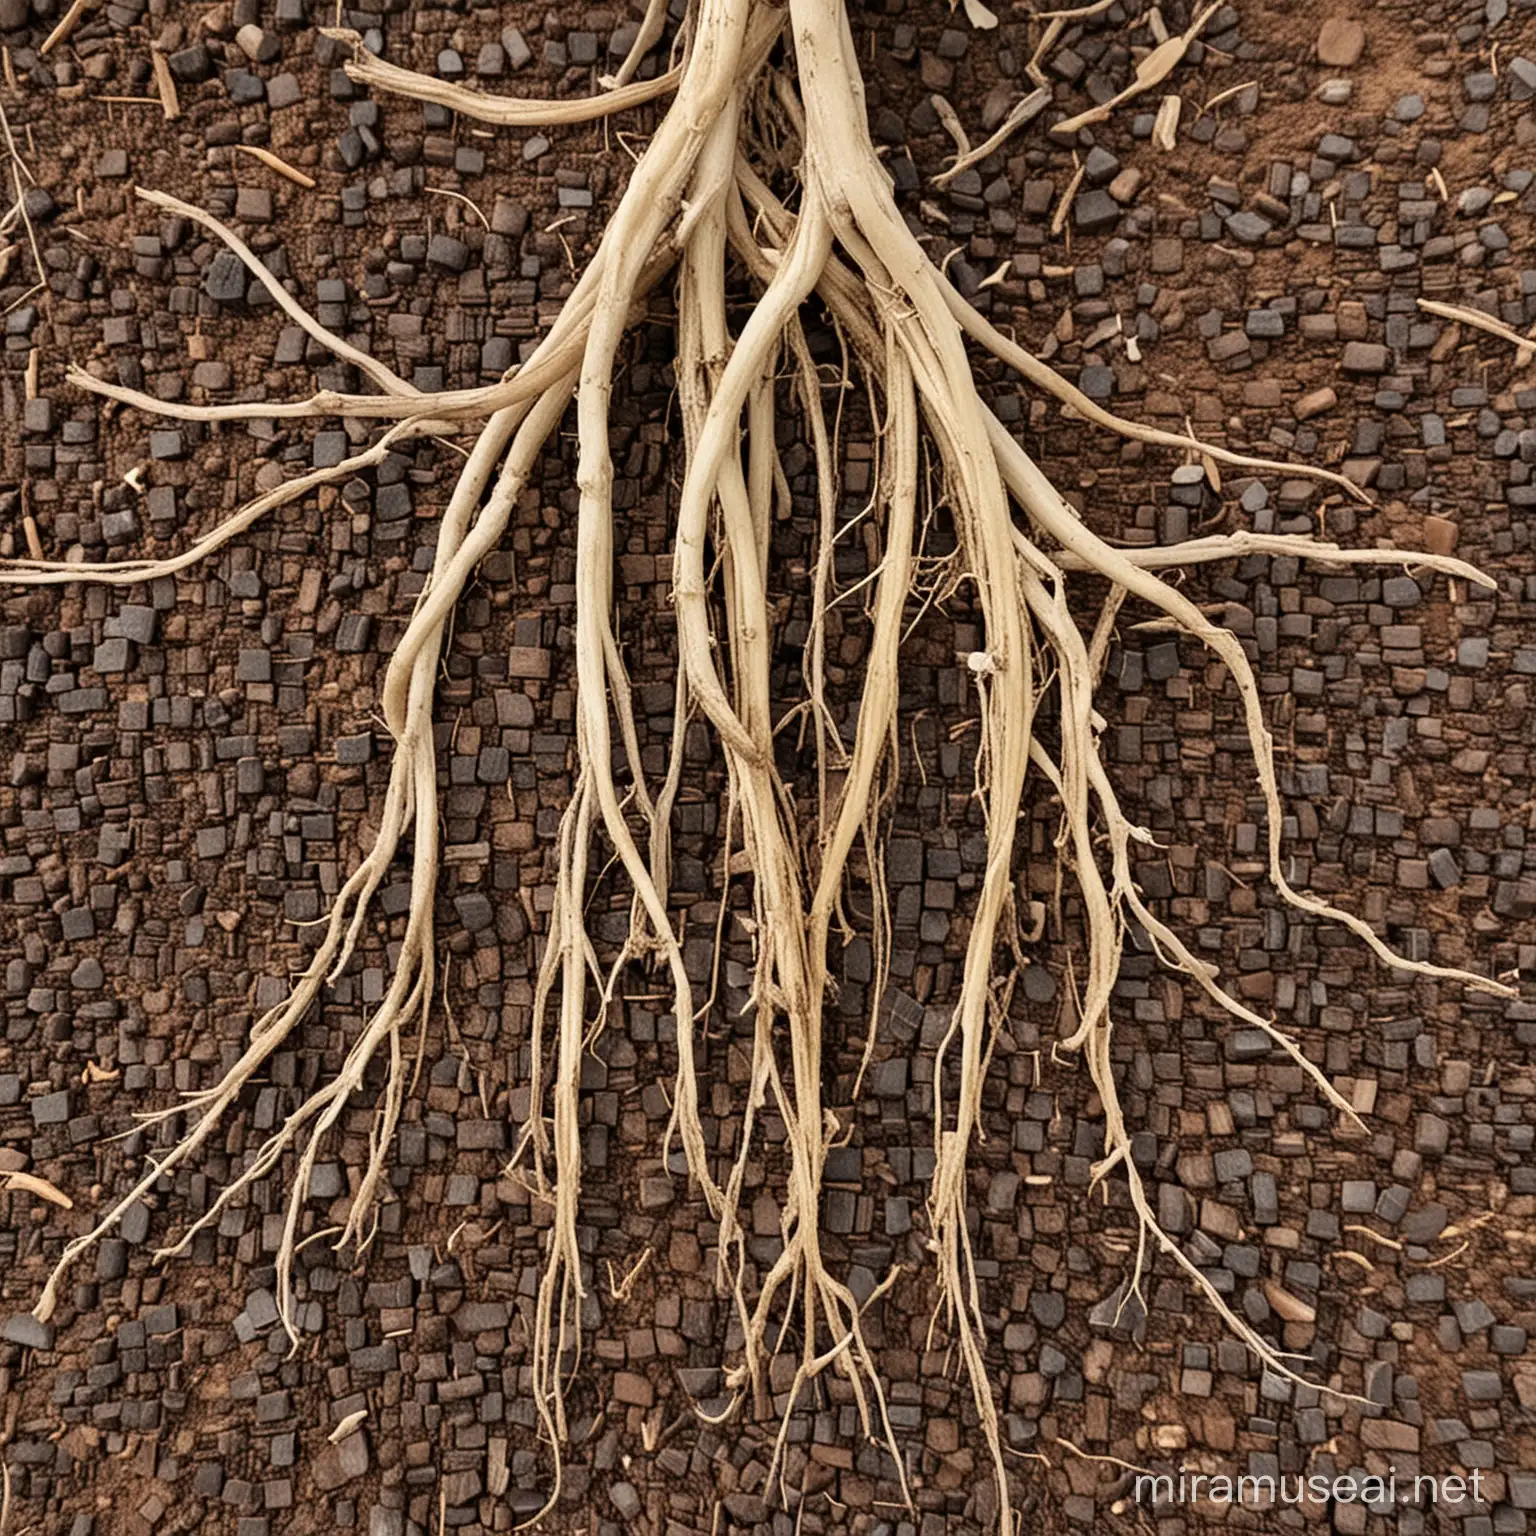 Licorice Plant Roots Harvested in Sunlit Field